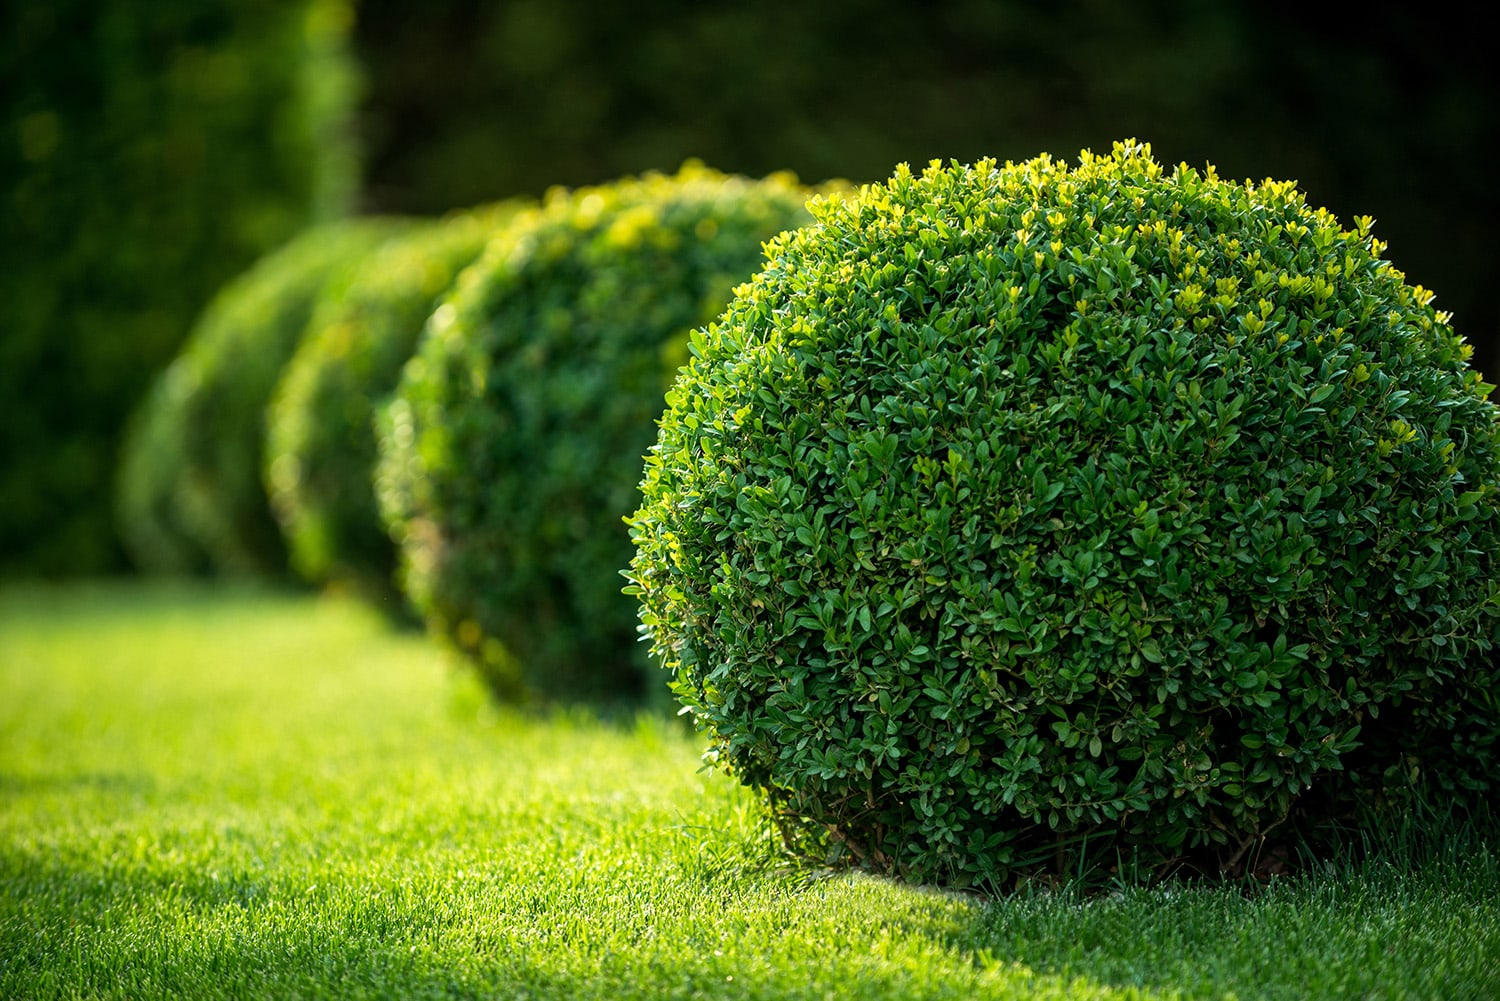 Beautifully-trimmed evergreen bushes